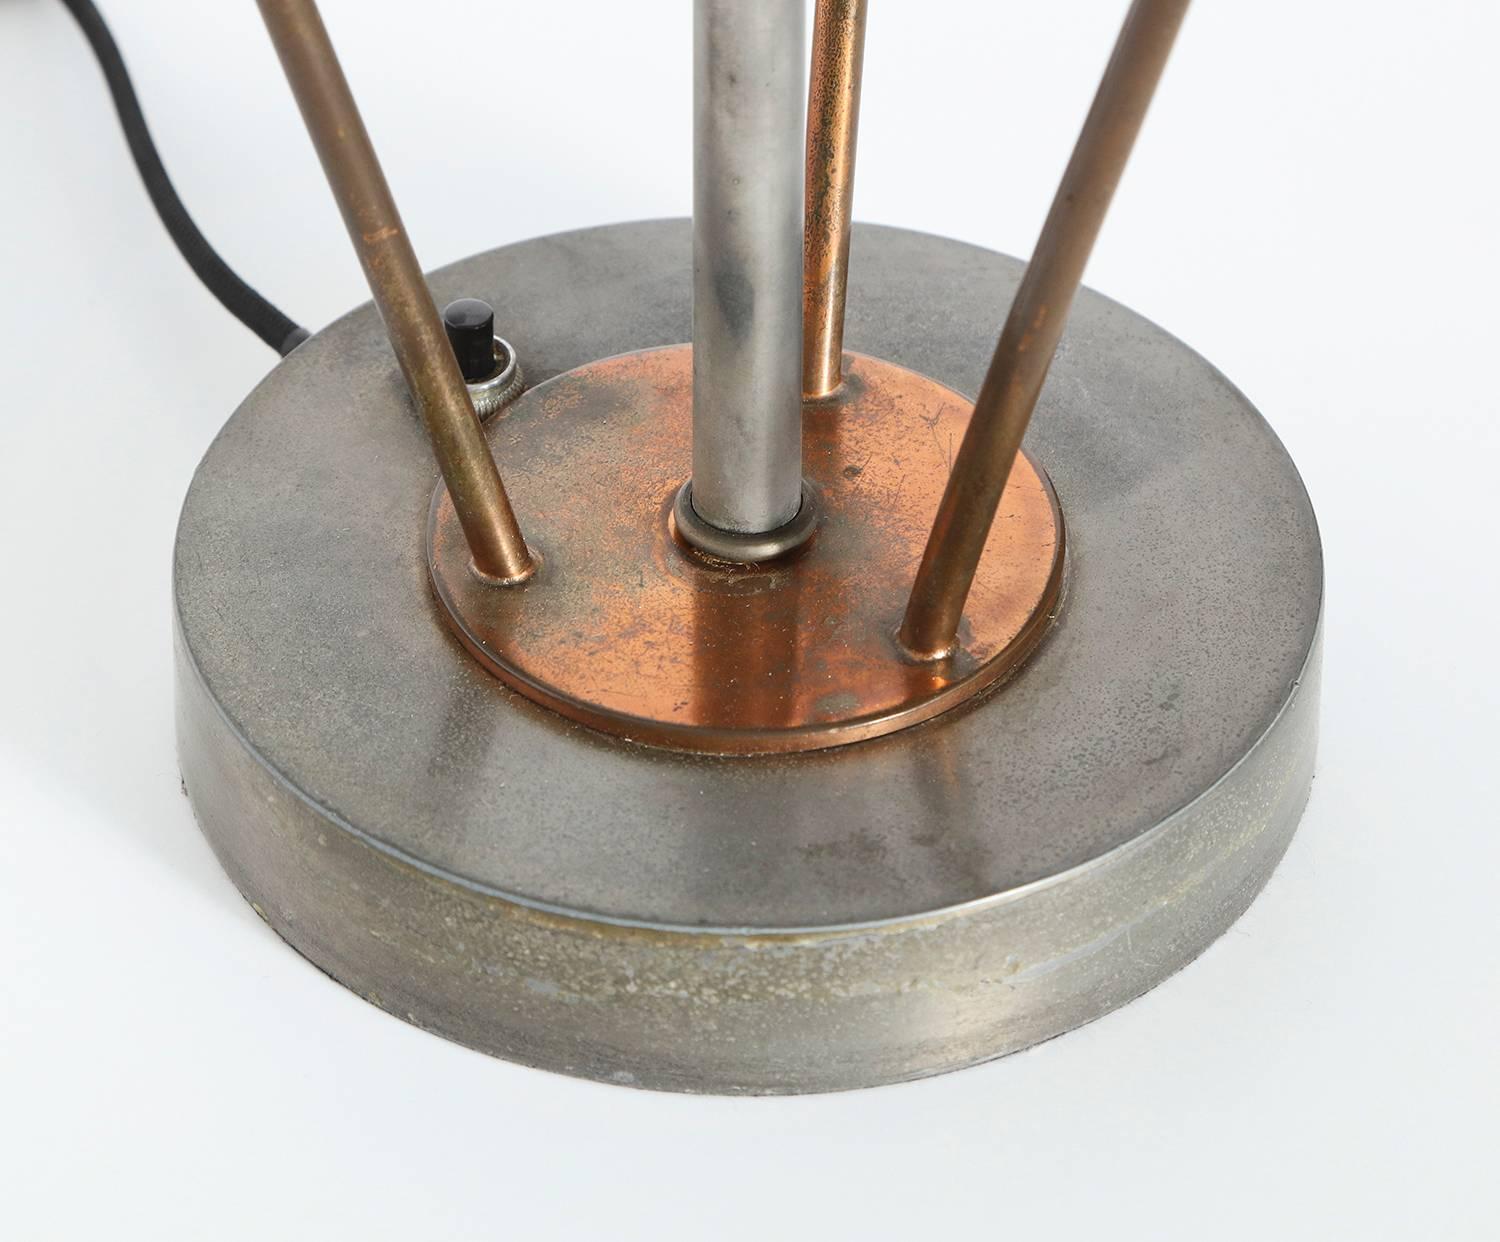 Modernist table lamp attributed to Kurt Versen.  Early table lamp with architectural lines and great details. Steel and aluminum with copper-plated, metal supports and frosted, plate glass defuser. Two standard Edison size sockets recently replaced,